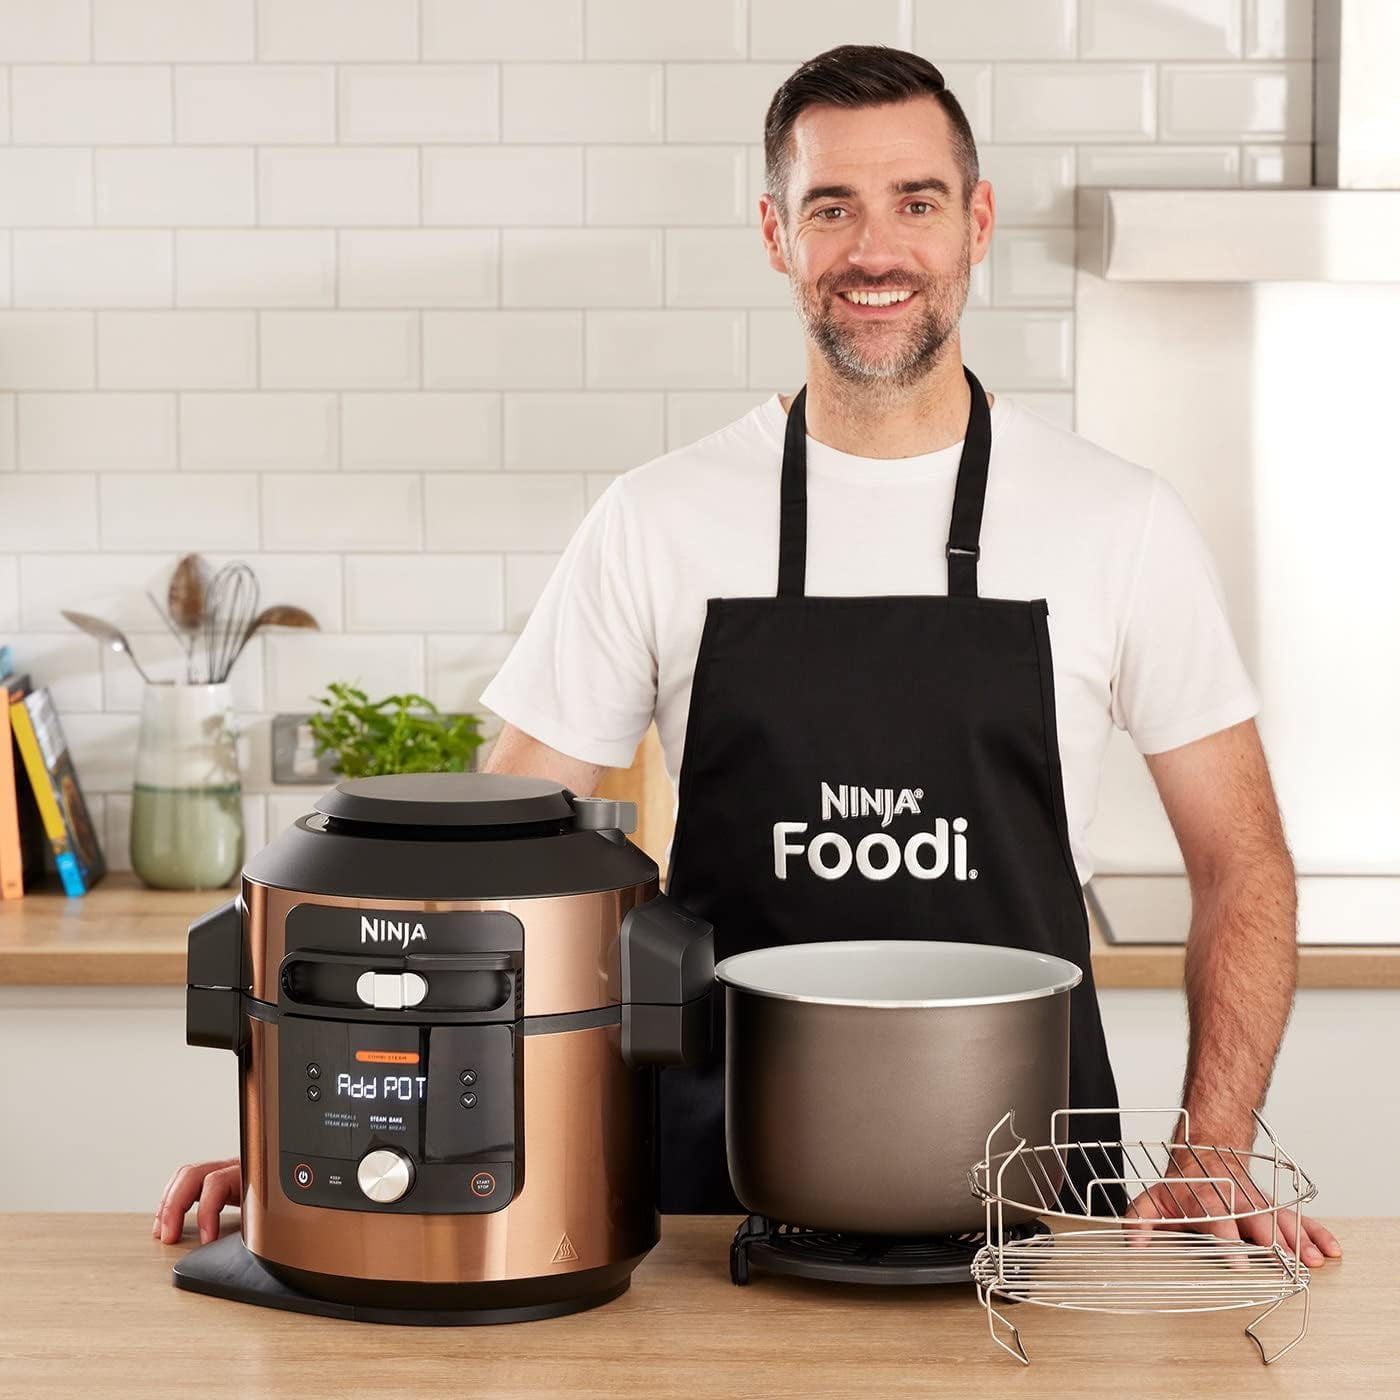  Ninja OL601 Foodi XL 8 Qt. Pressure Cooker Steam Fryer with  SmartLid, 14-in-1 that Air Fries, Bakes & More, with 3-Layer Capacity, 5  Qt. Crisp Basket & 45 Recipes, Silver/Black